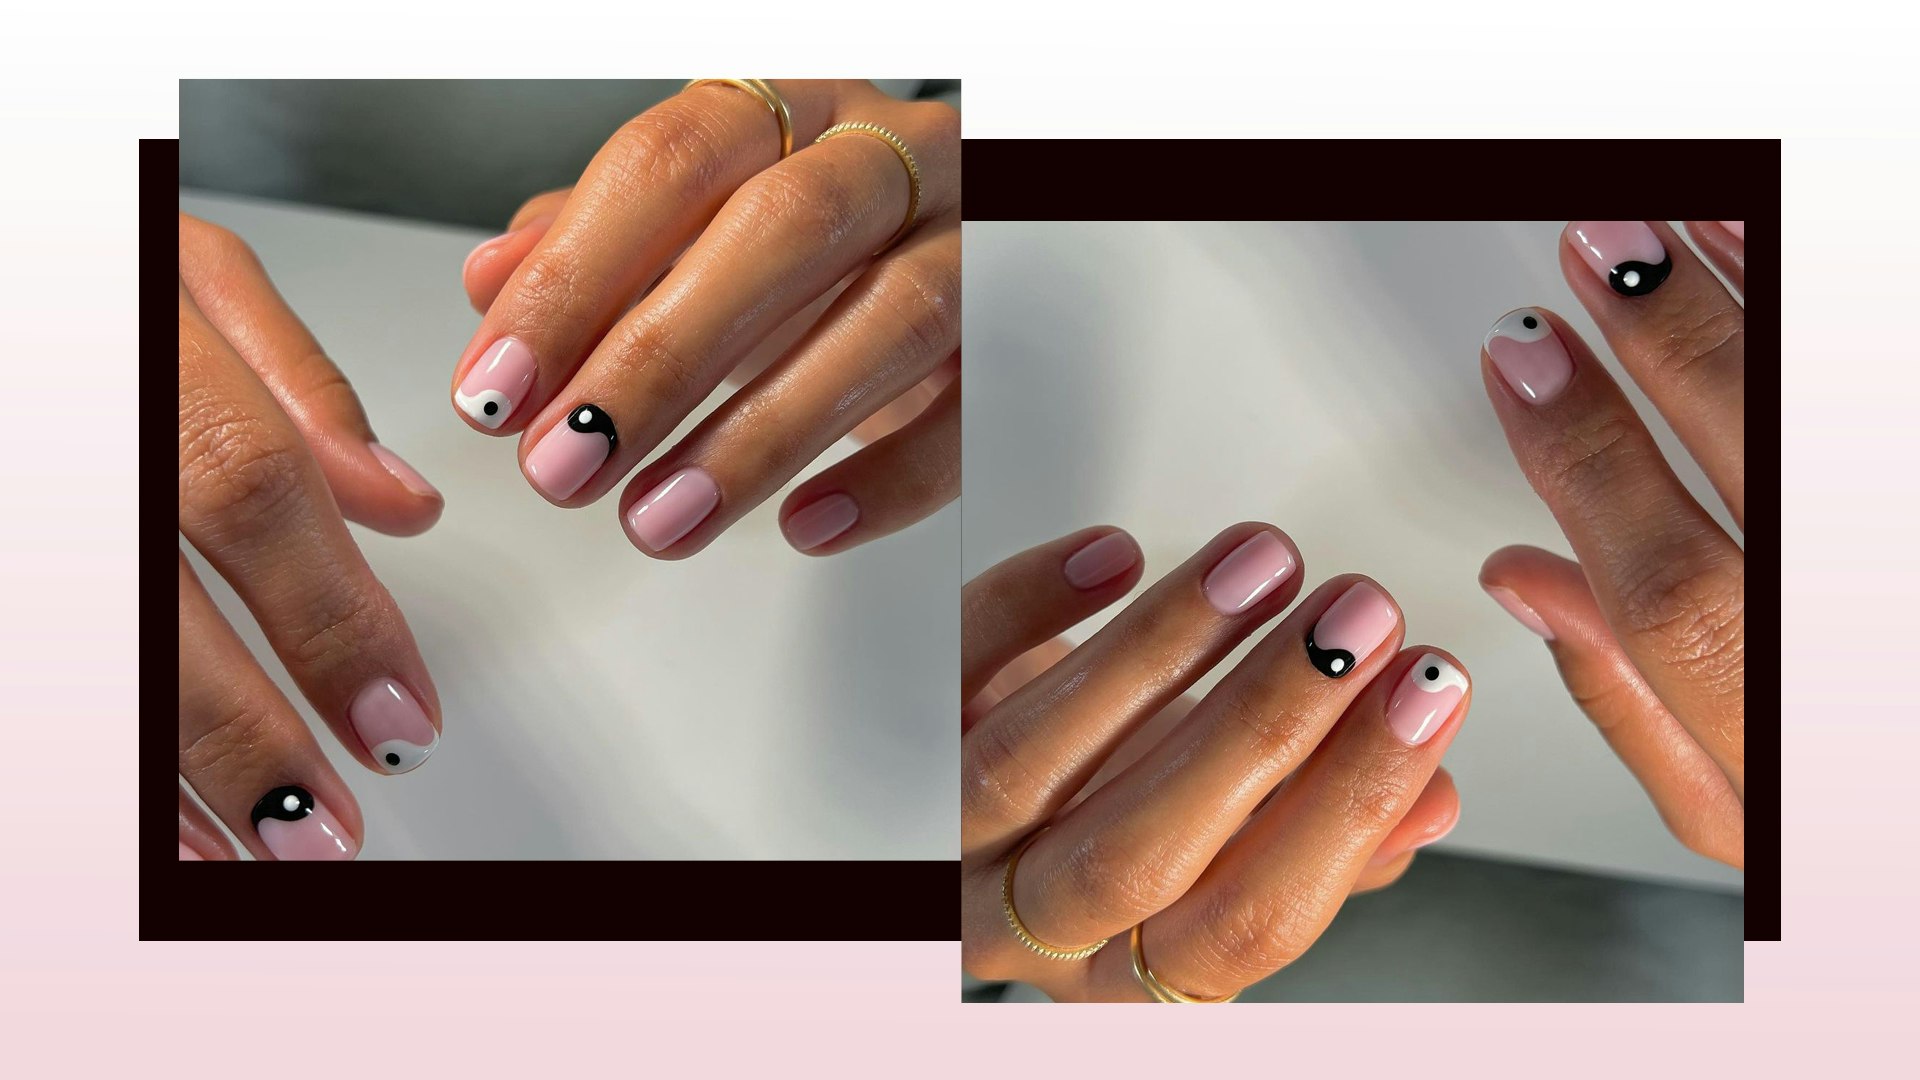 9. Dainty Nail Art for Small Nails - wide 5